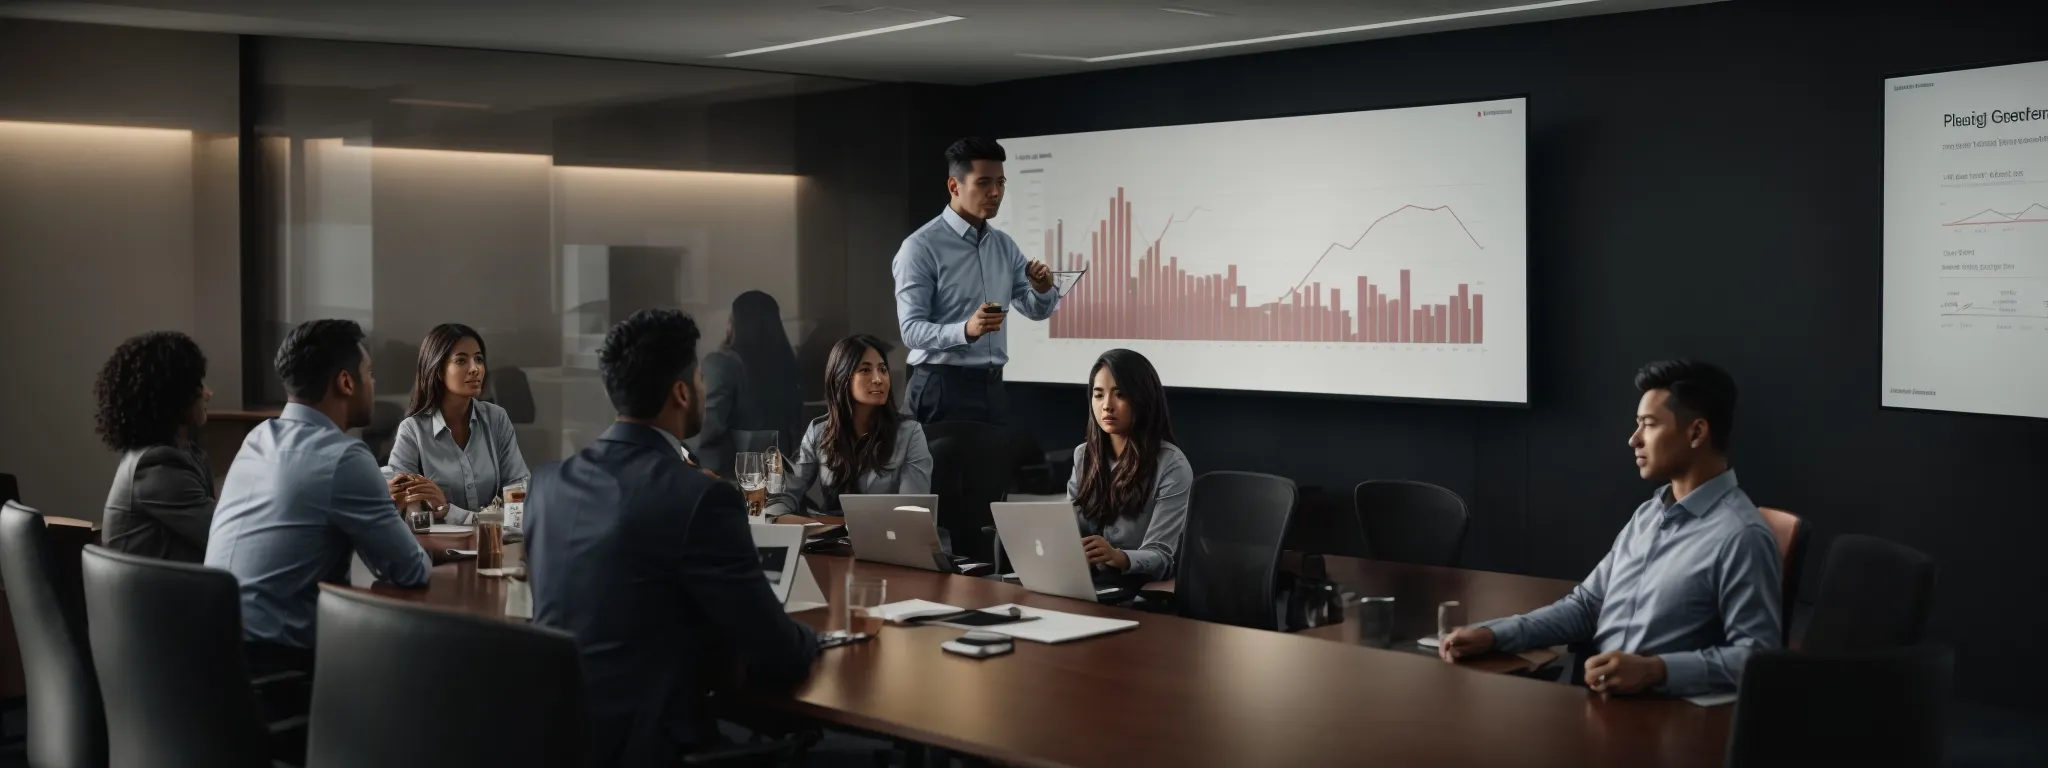 a conference room with a large screen displaying a graph while marketing professionals discuss strategies.